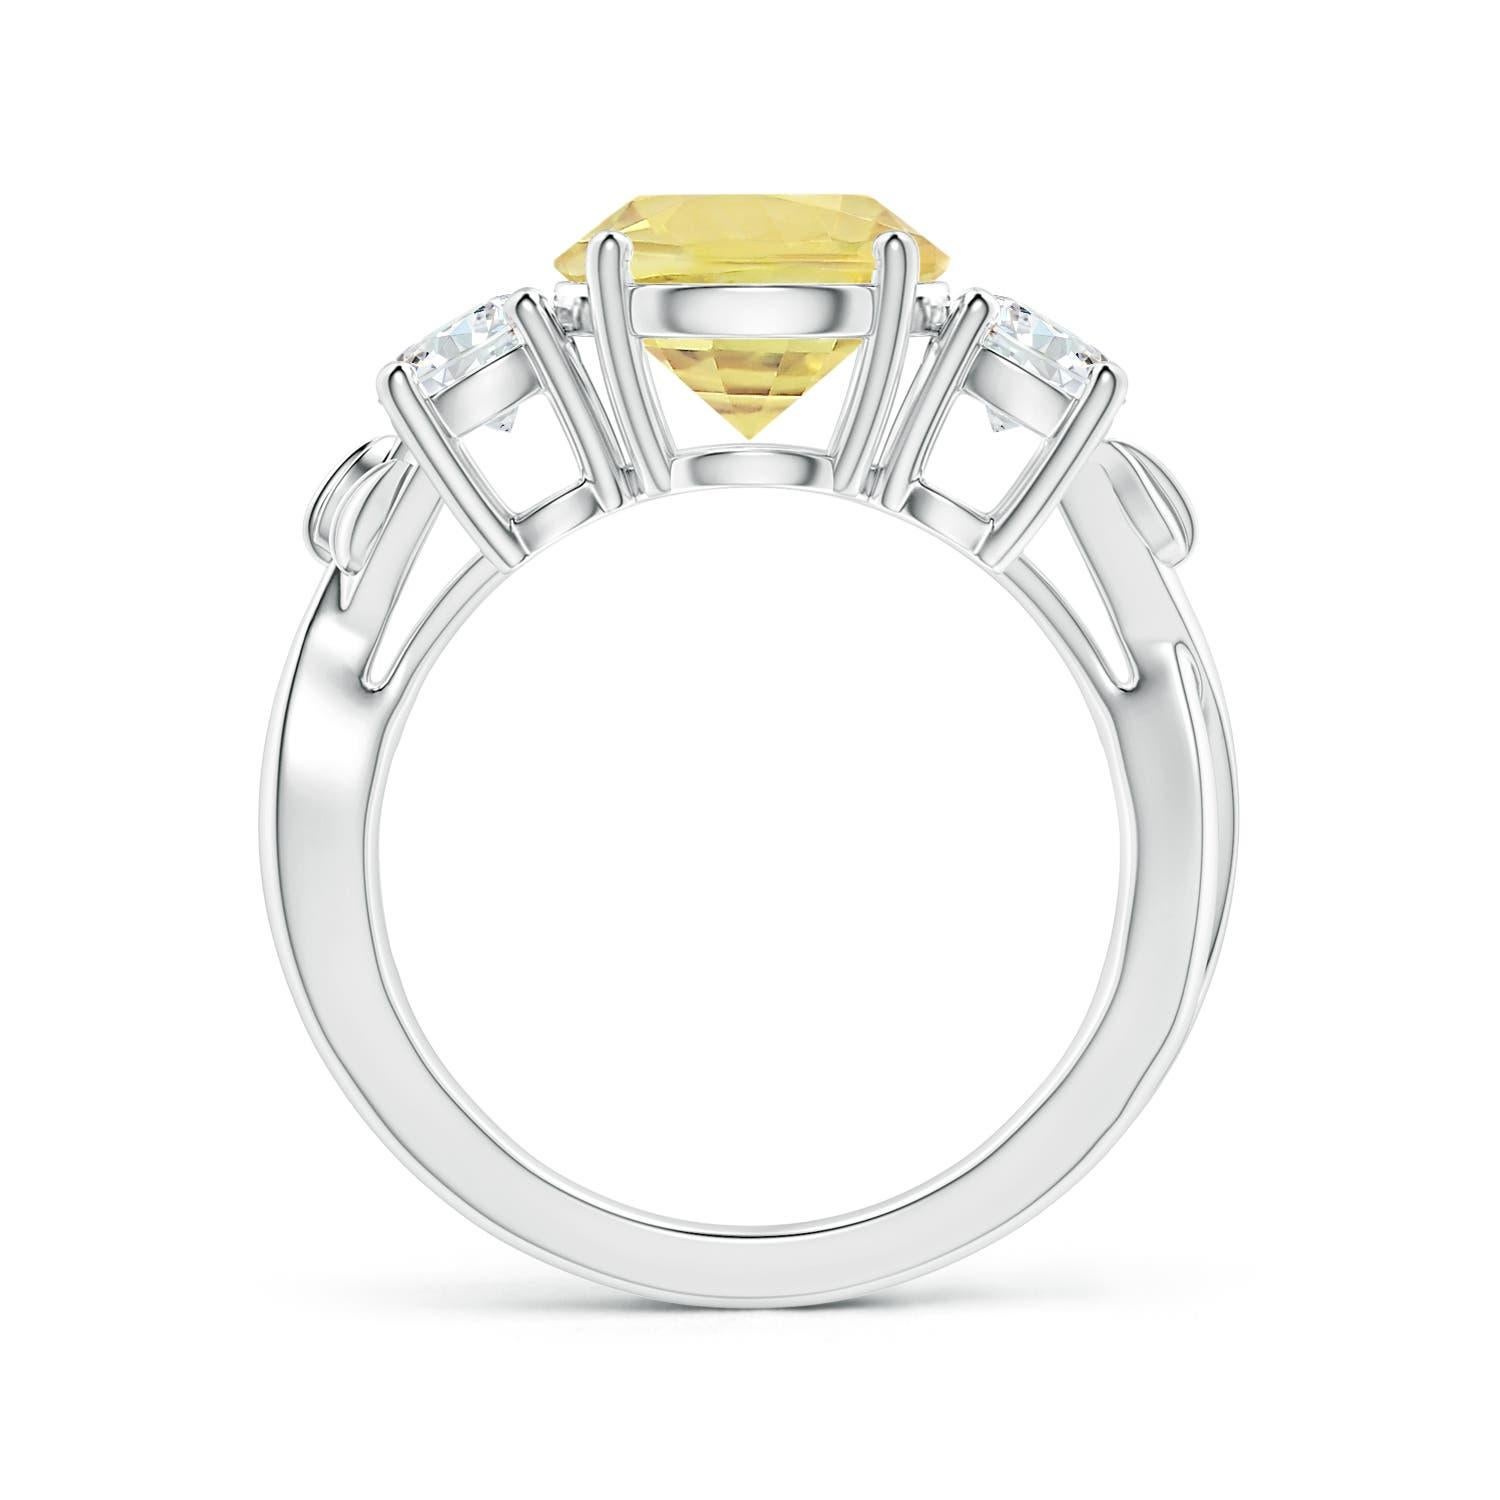 For Sale:  Angara Gia Certified Yellow Sapphire 3-Stone Ring in White Gold with Diamonds 2